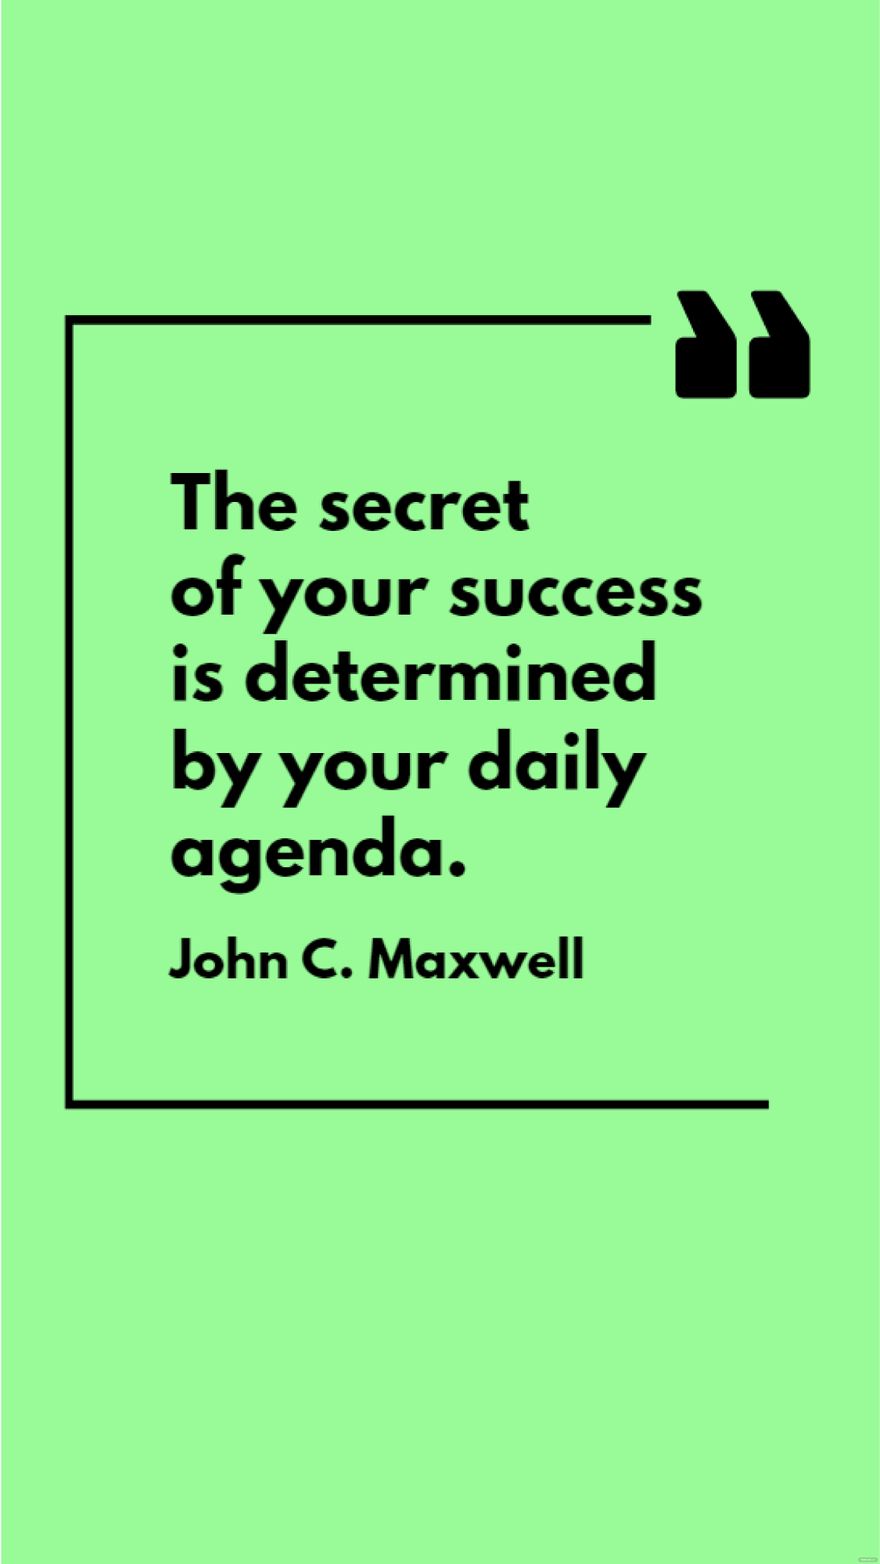 John C. Maxwell - The secret of your success is determined by your daily agenda.